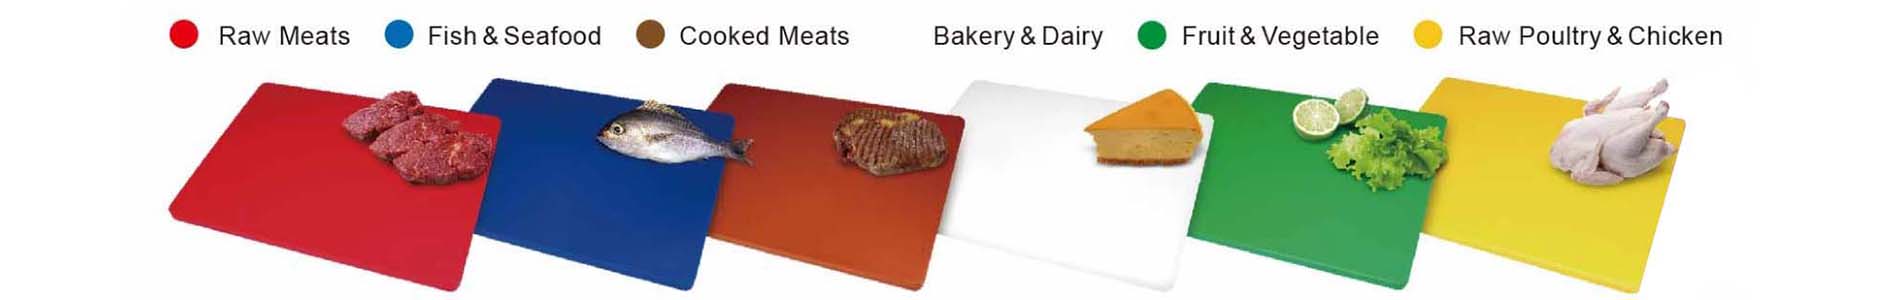 Low Density Colour Coded Chopping Boards | 6 Colour Options